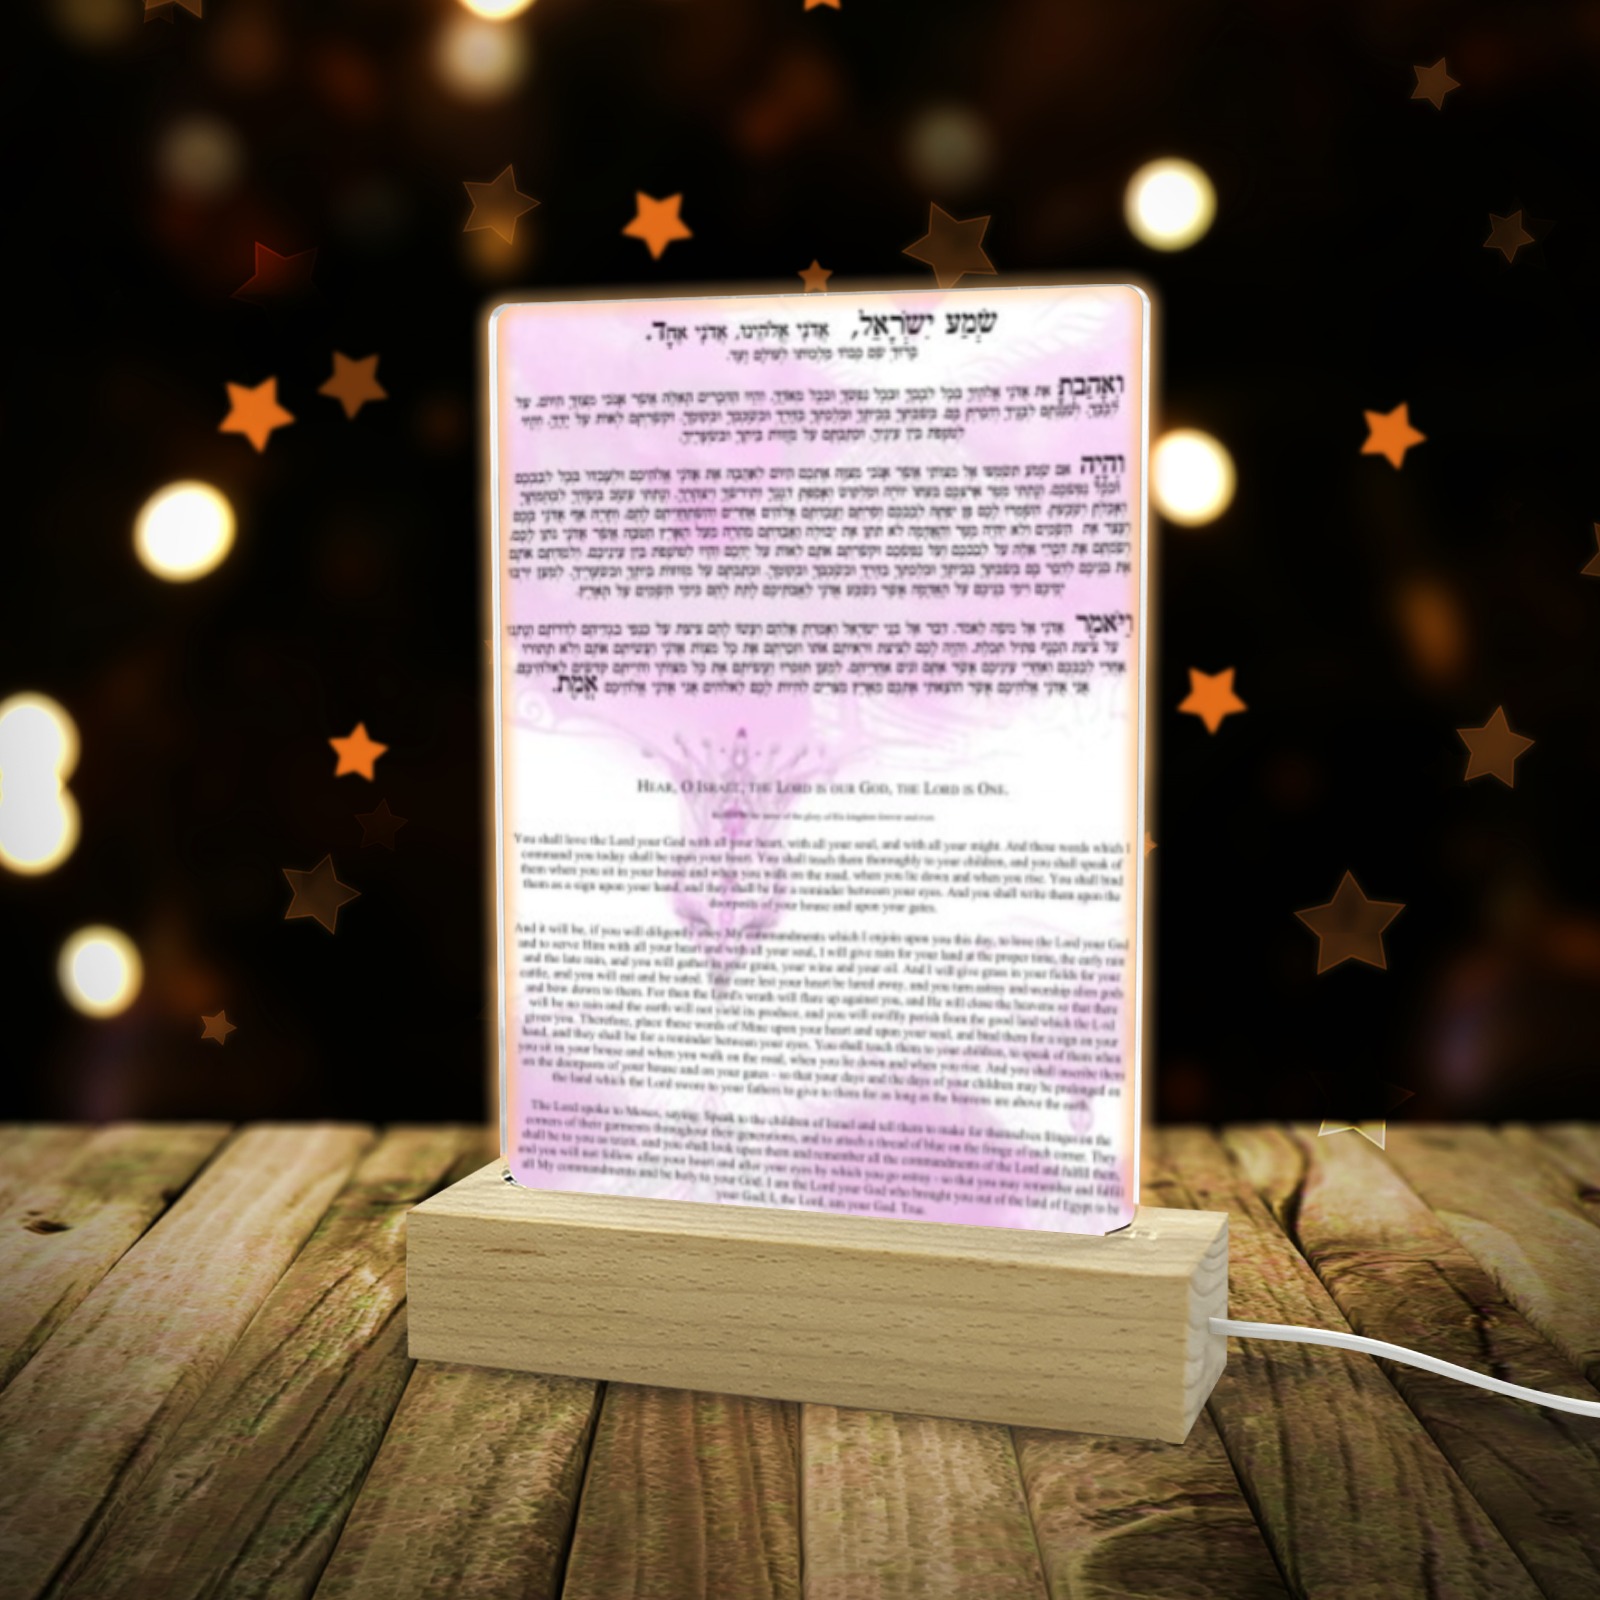 shema israel-Hebrew and English 5-4 Acrylic Photo Print with Colorful Light Square Base 5"x7.5"